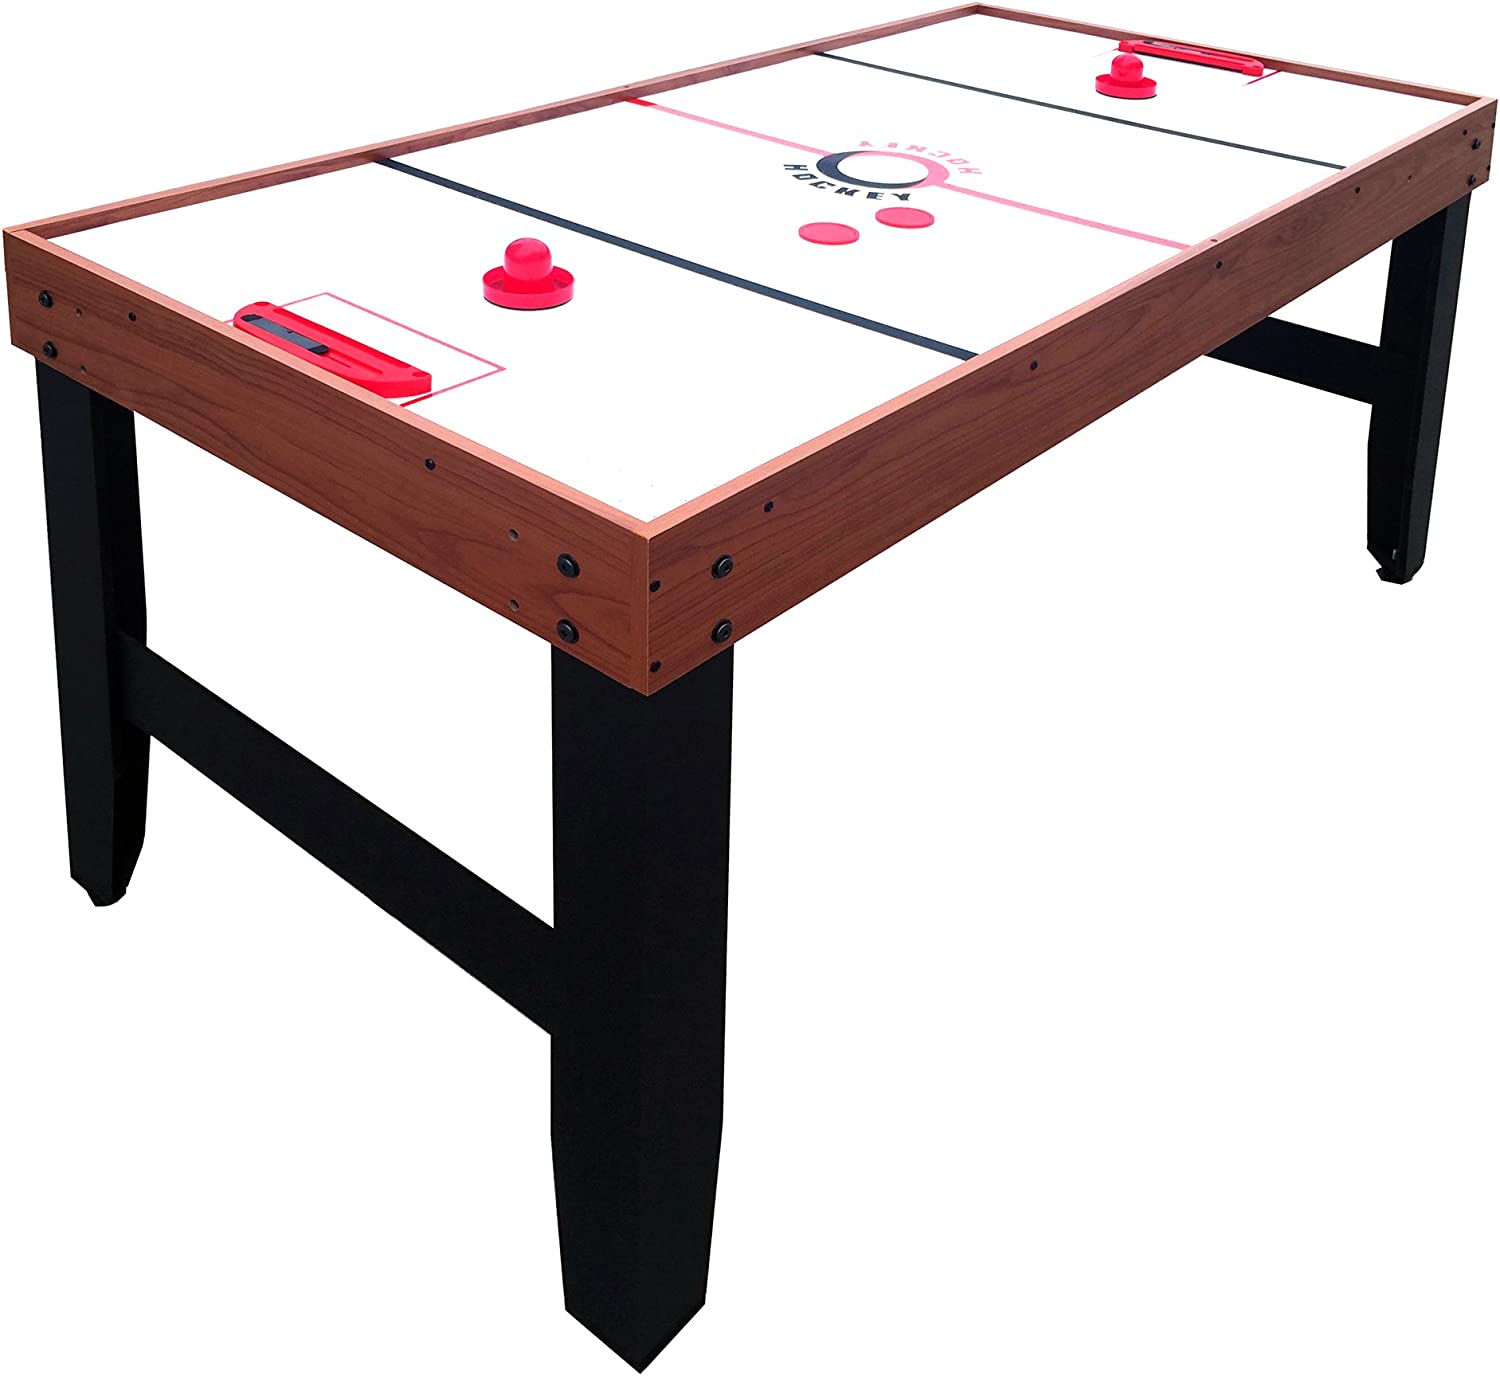 Hathaway Accelerator 4-in-1 Multi-Game Table with Basketball, Air Hockey, Table Tennis and Dry Erase Board for Kids and Families